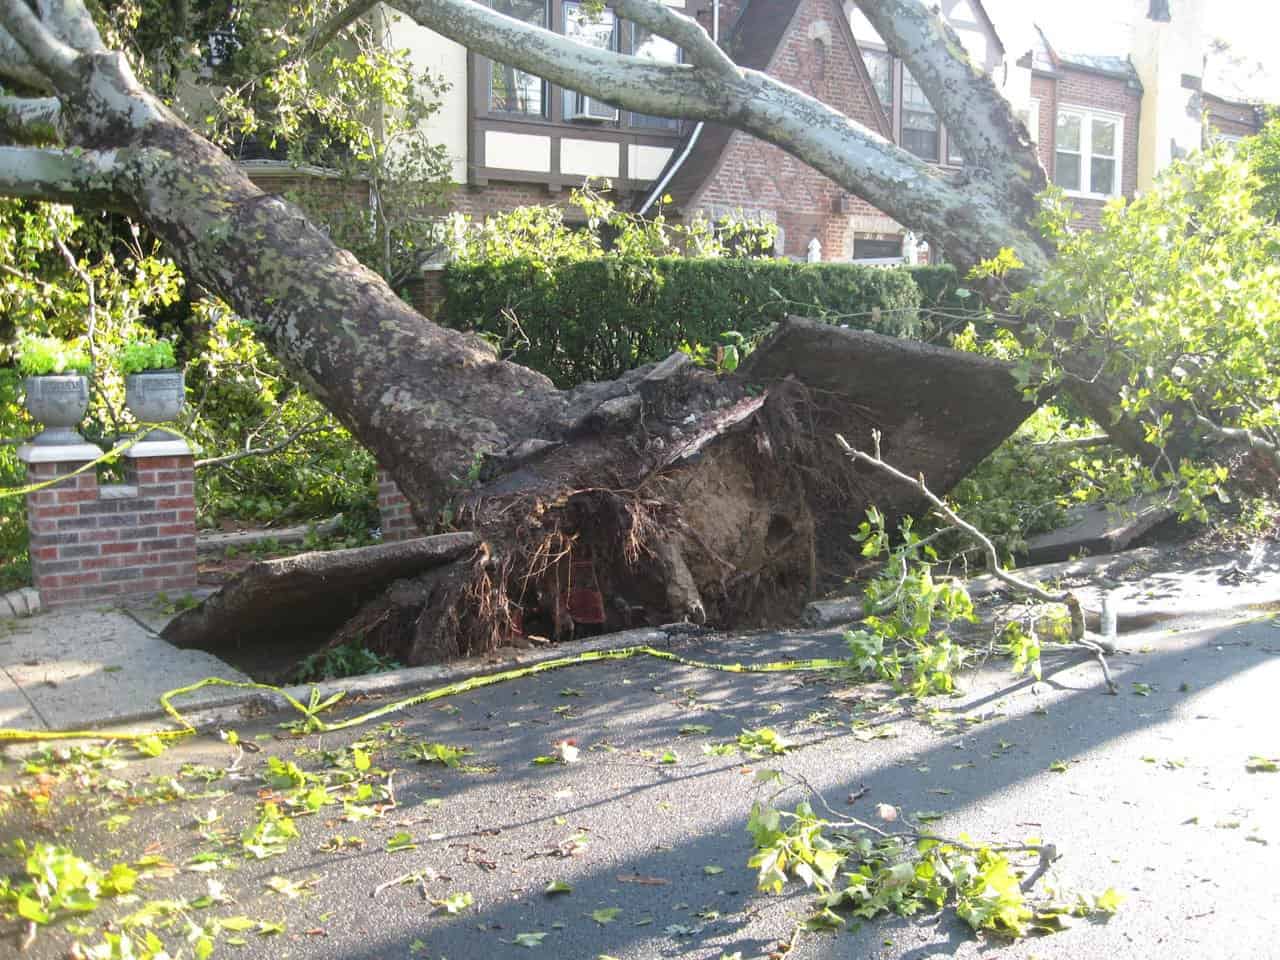 The exposed rootball of a tree is shown in between city sidewalk slabs.